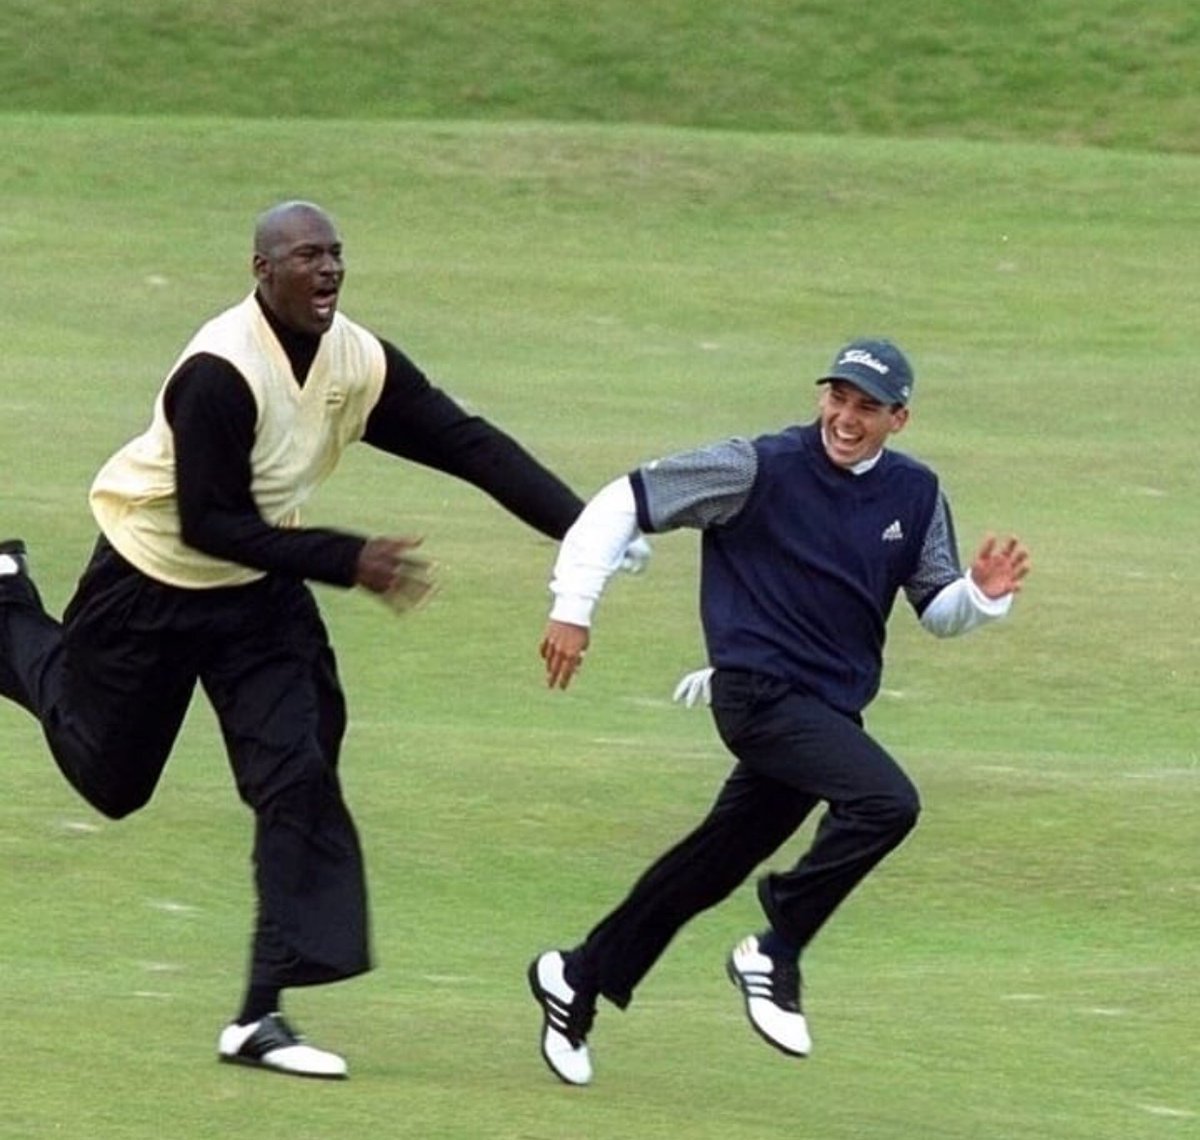 RT @TomKludt: Can’t stop looking at these photos of Michael Jordan chasing after Sergio Garcia https://t.co/Lj7jmVm7la